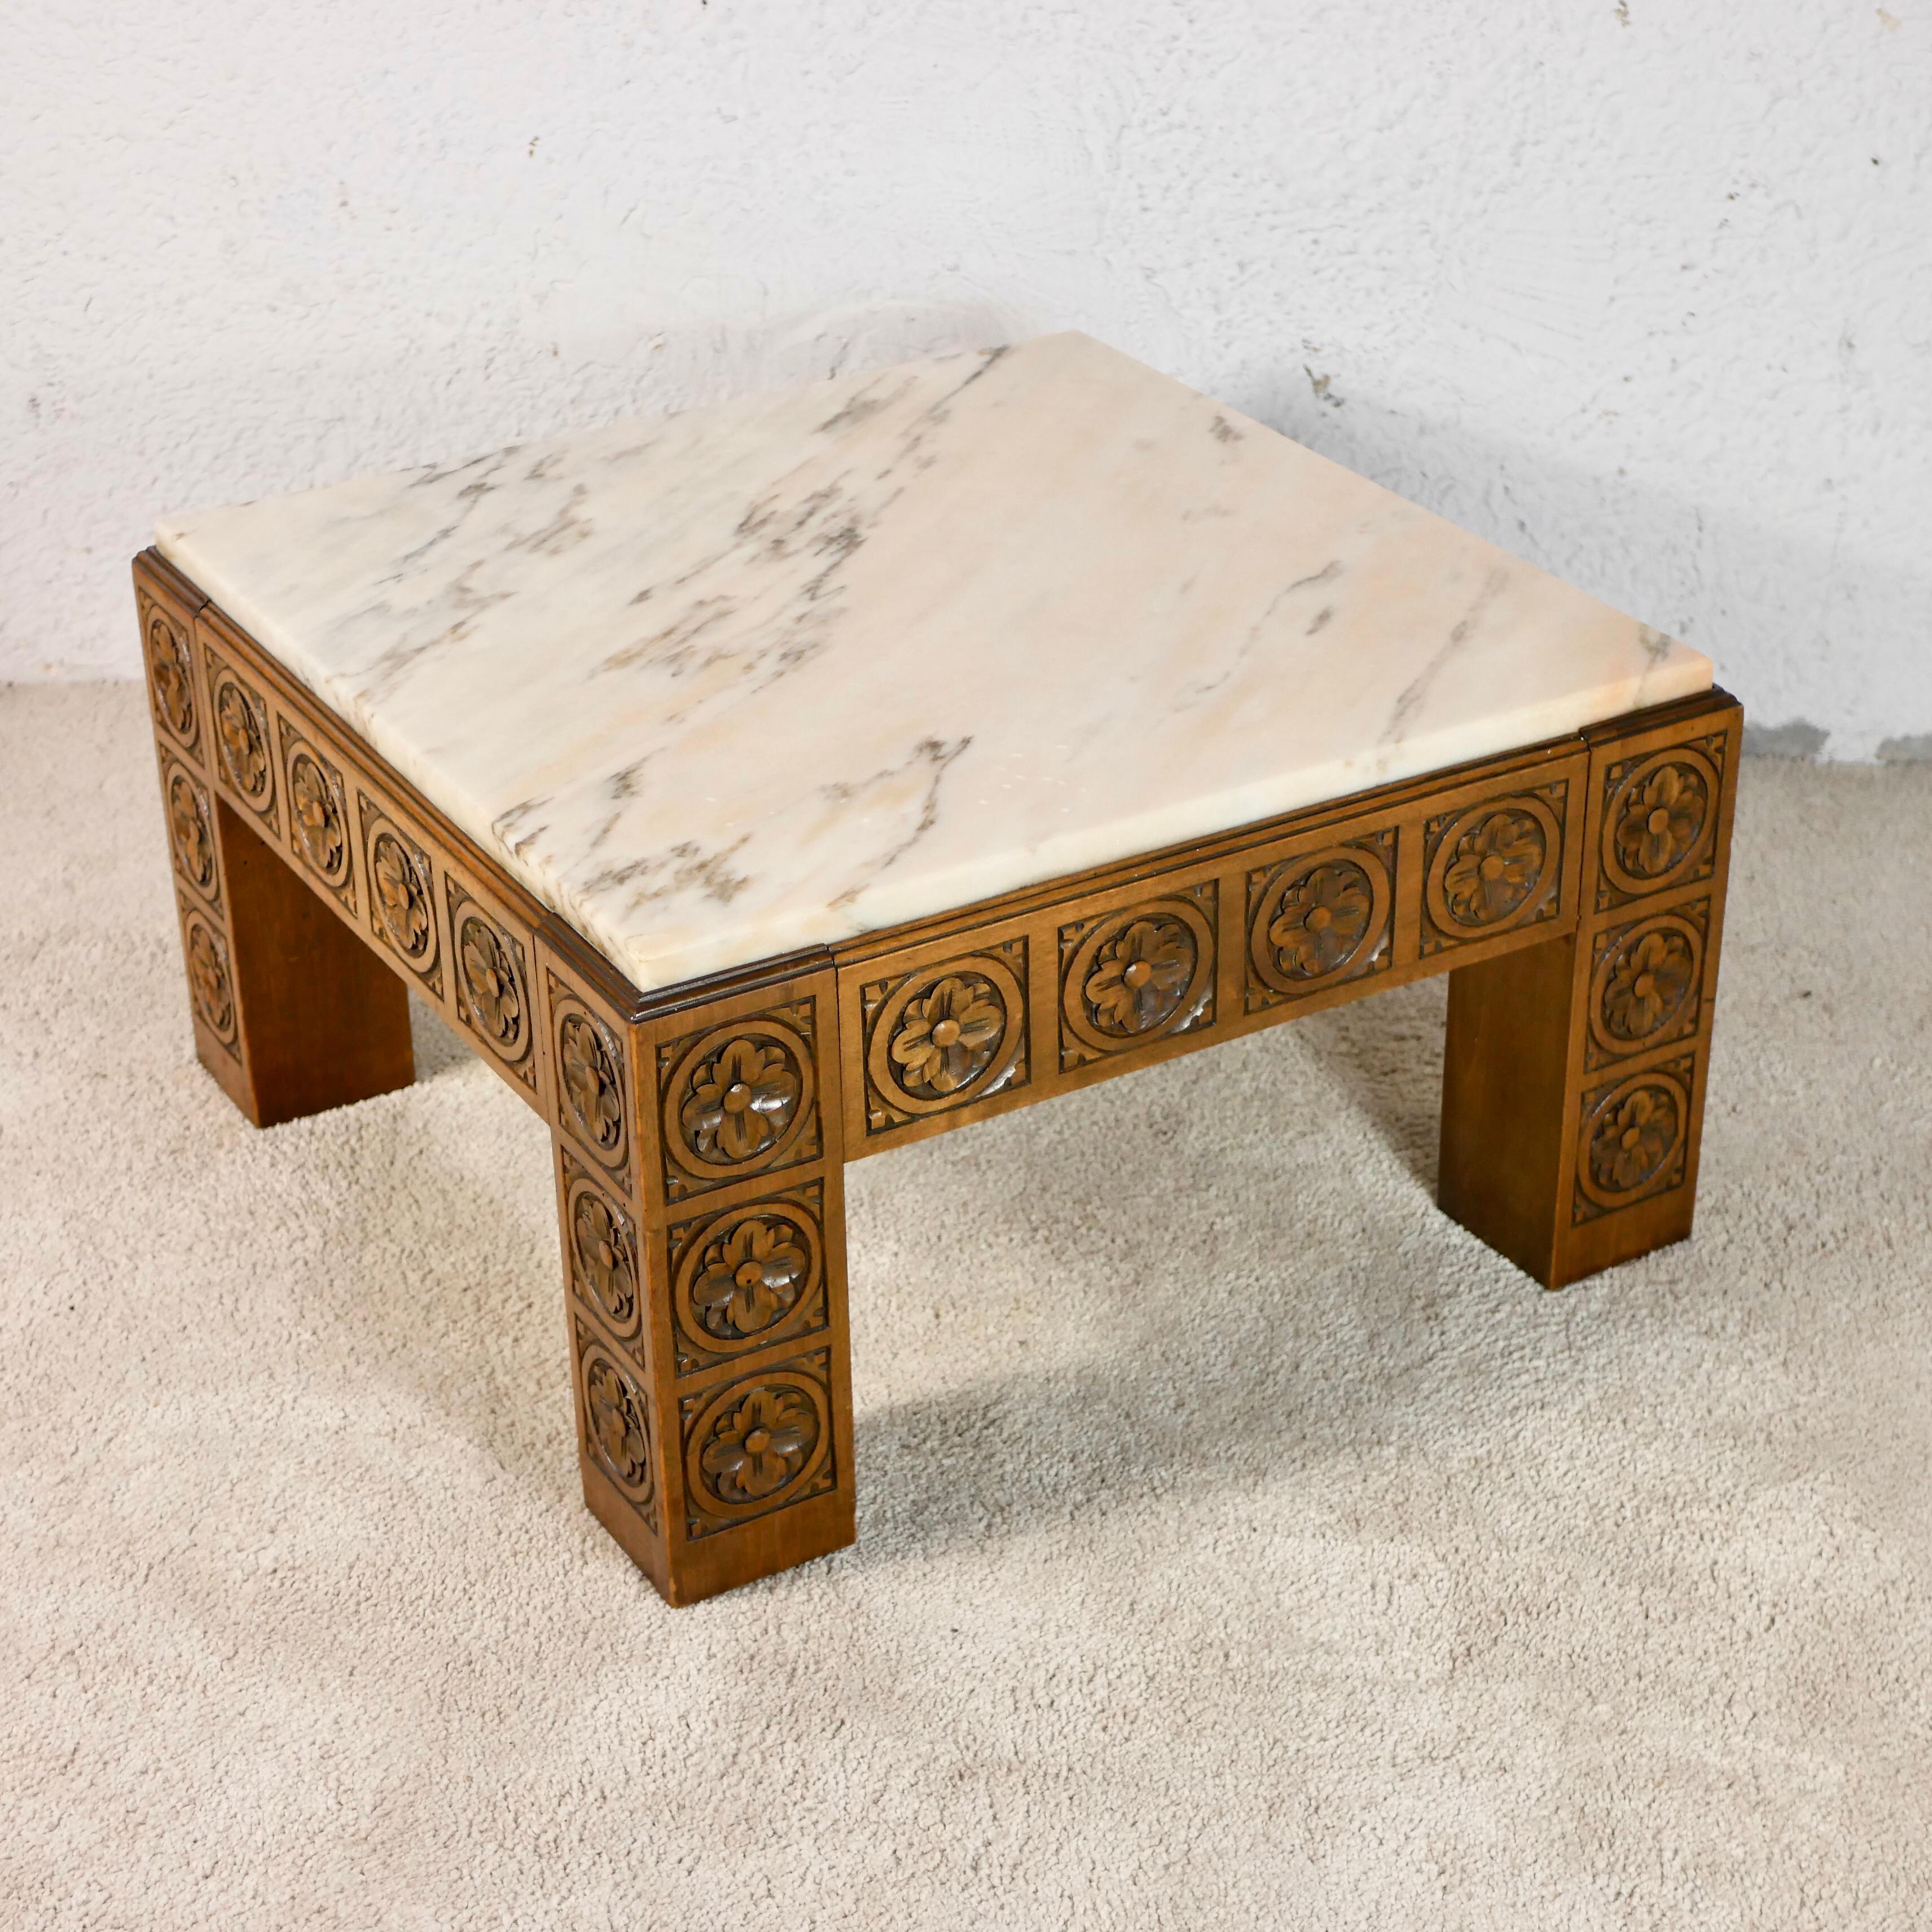 Mid-Century Modern Midcentury Square Carved Wood and Marble Coffee Table from Spain